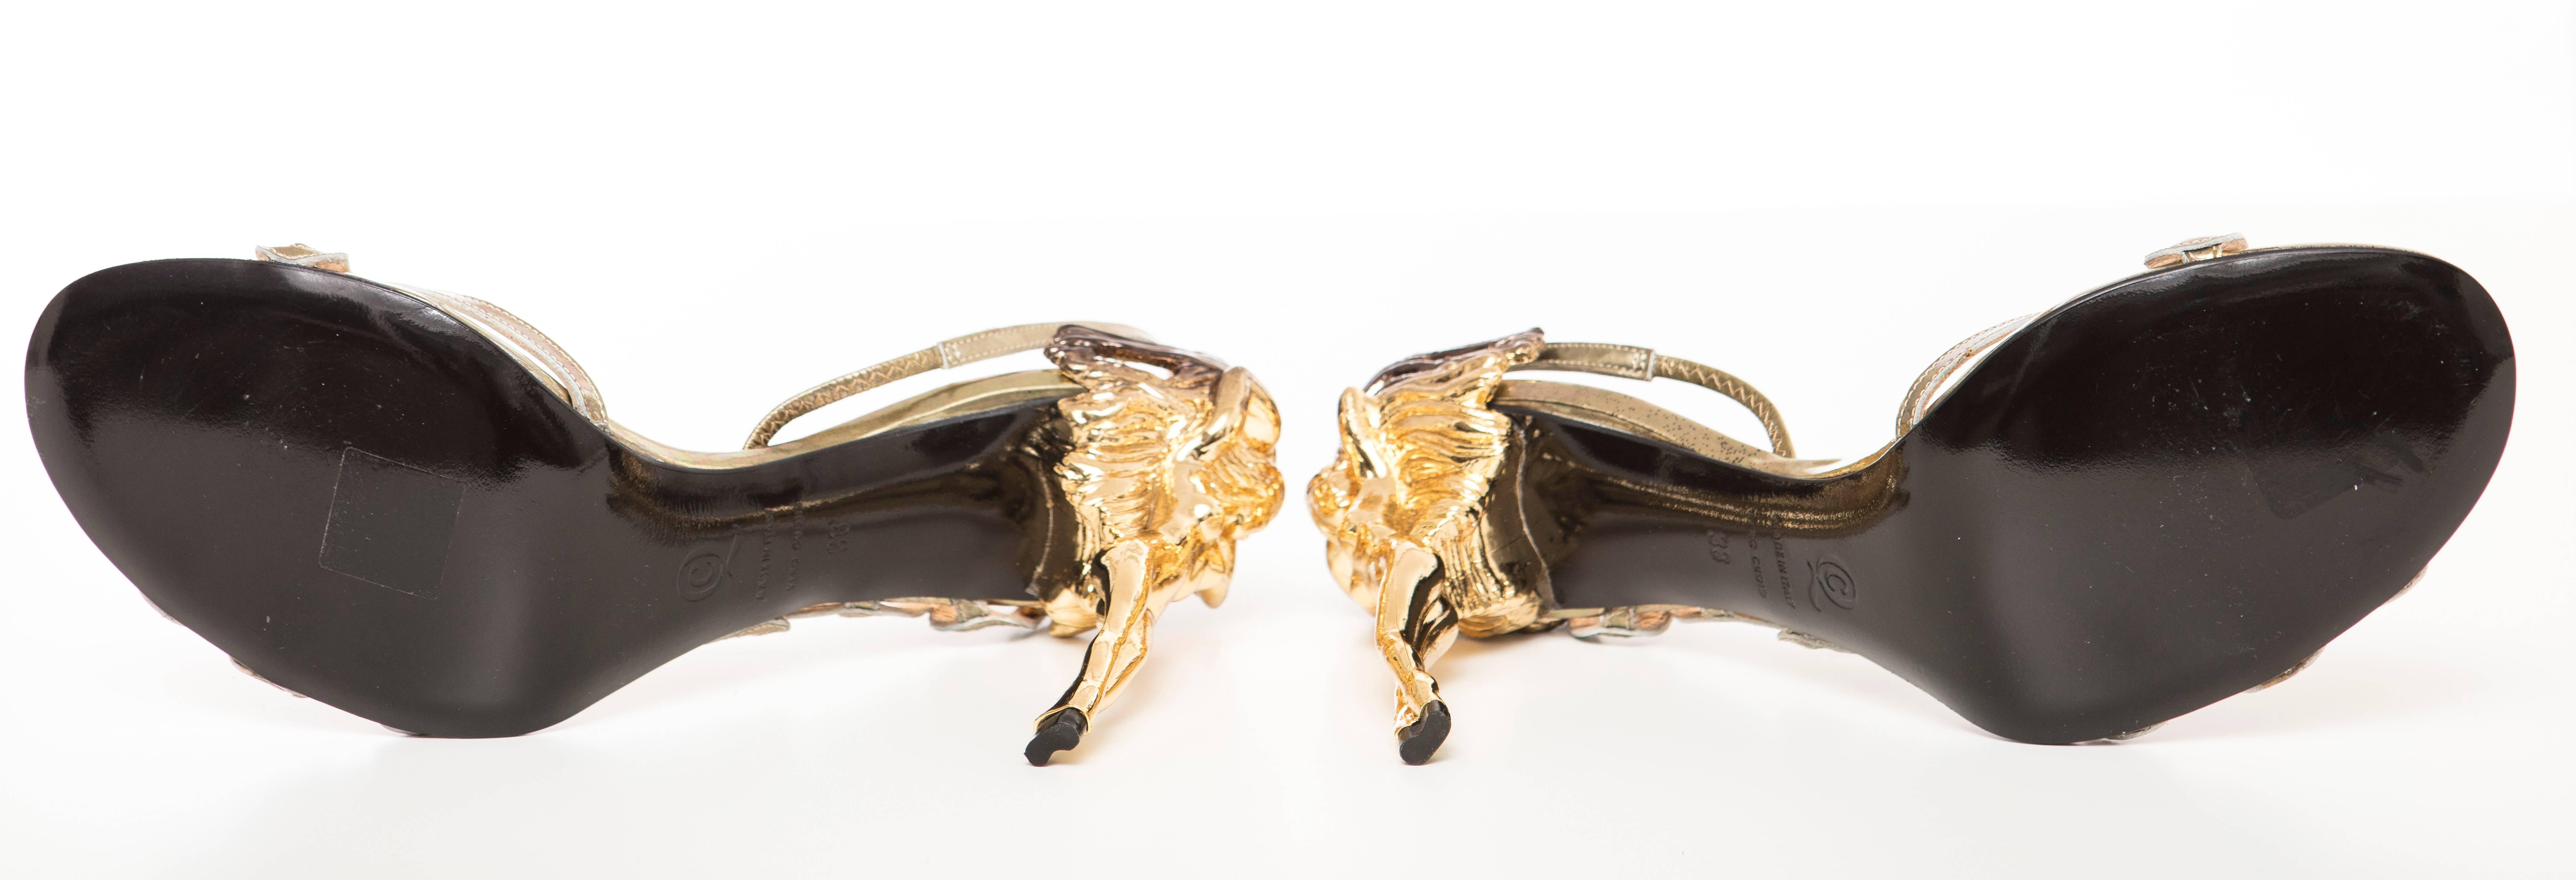 Alexander McQueen Angels & Demons Gold Leather Slingback Sandals, Fall 2010 3